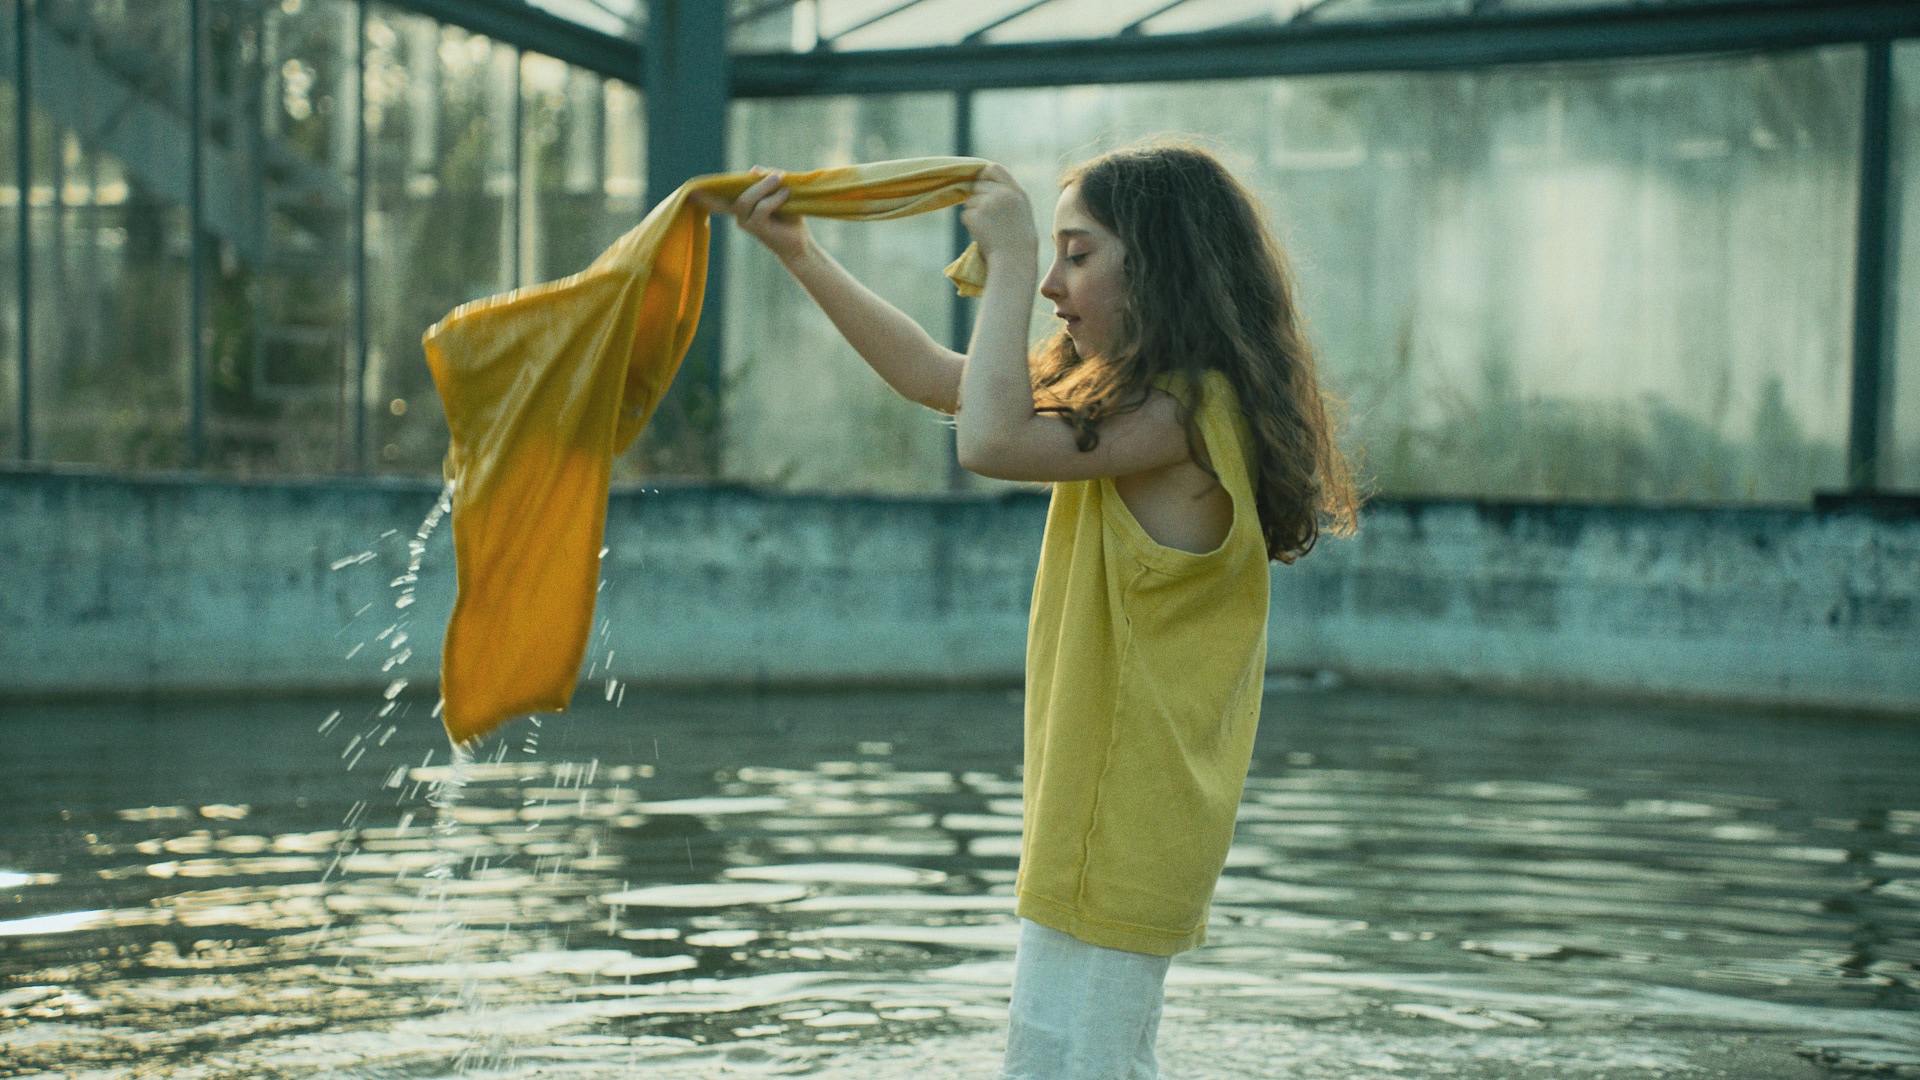 A girl standing in a pool wrings the water out of a yellow piece of wet clothing.